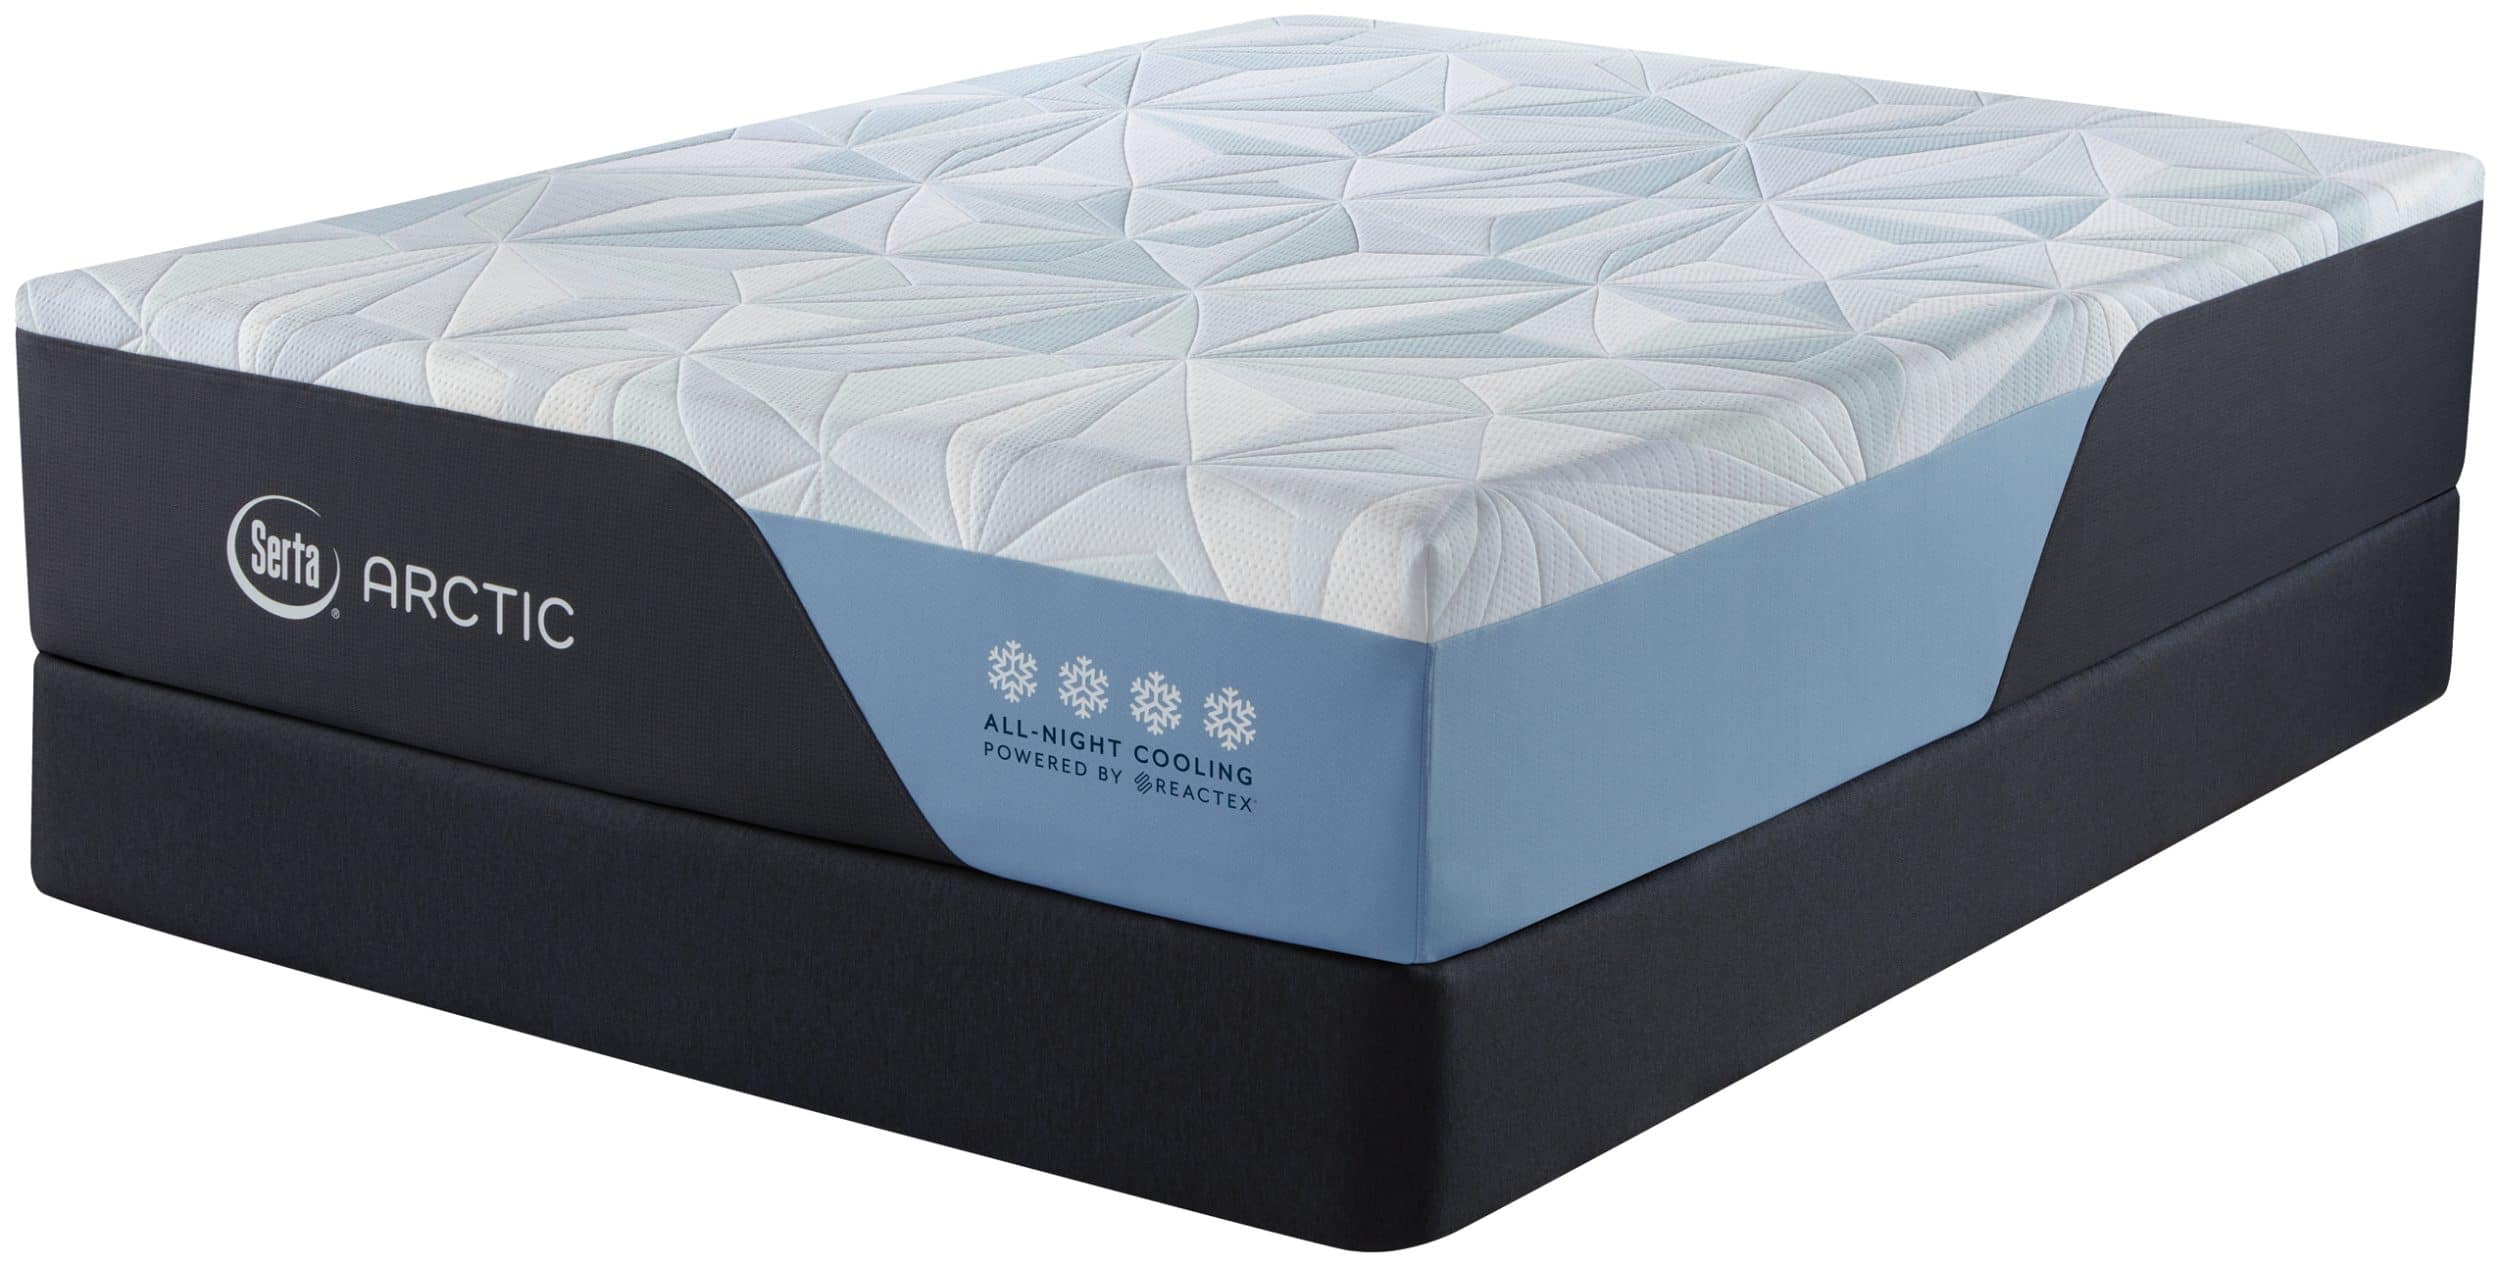 Serta arctic mattress photo with all night cooling powered by reactex